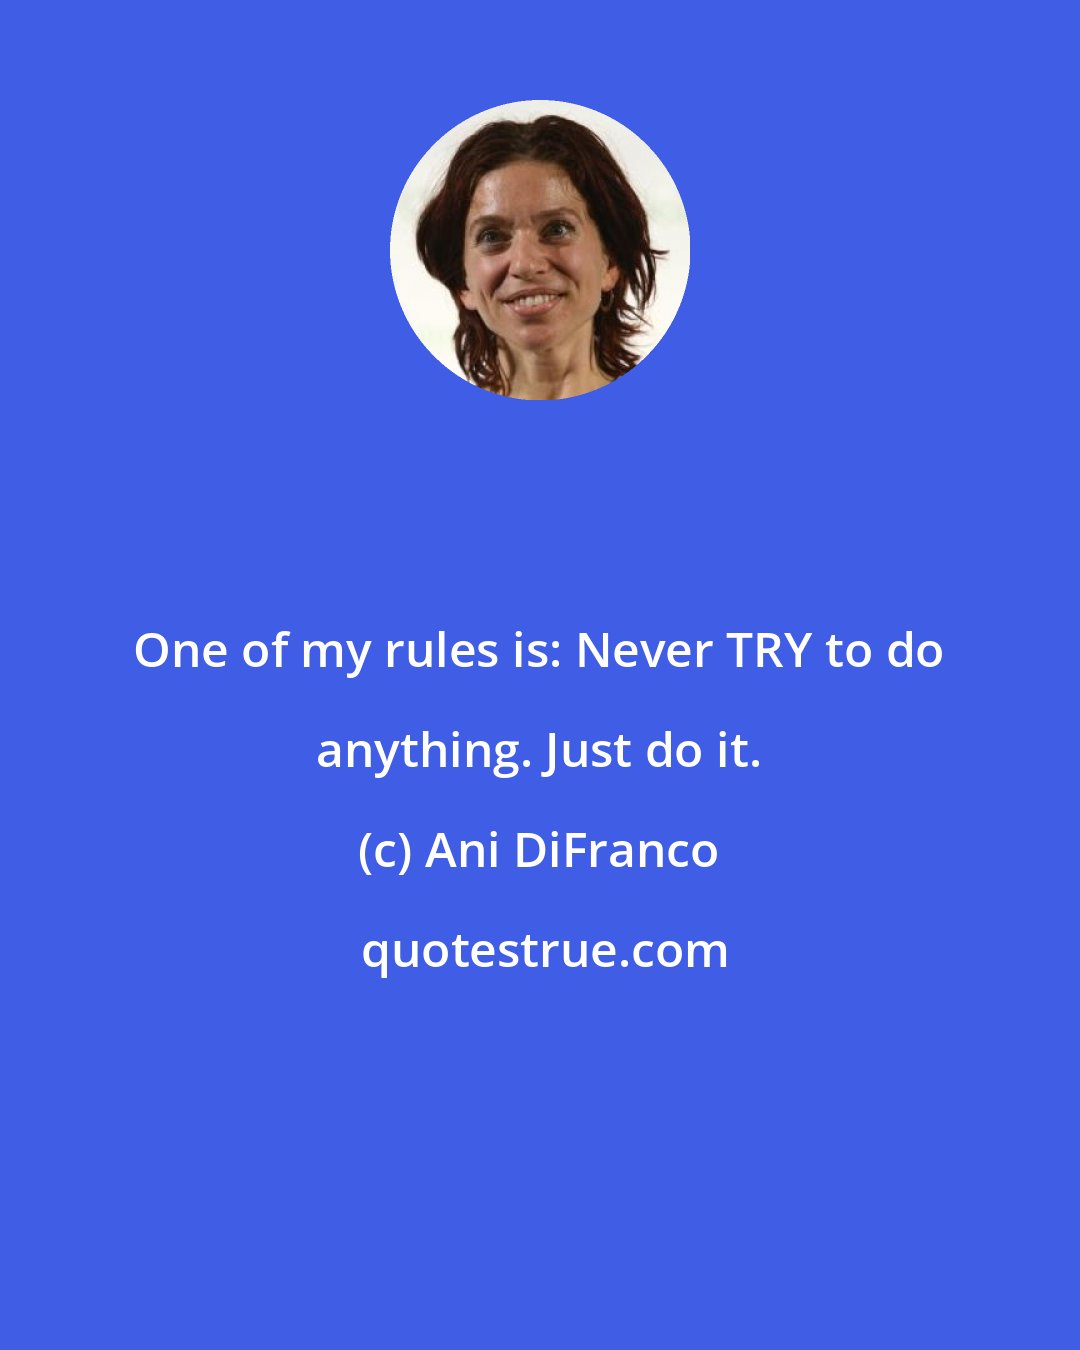 Ani DiFranco: One of my rules is: Never TRY to do anything. Just do it.